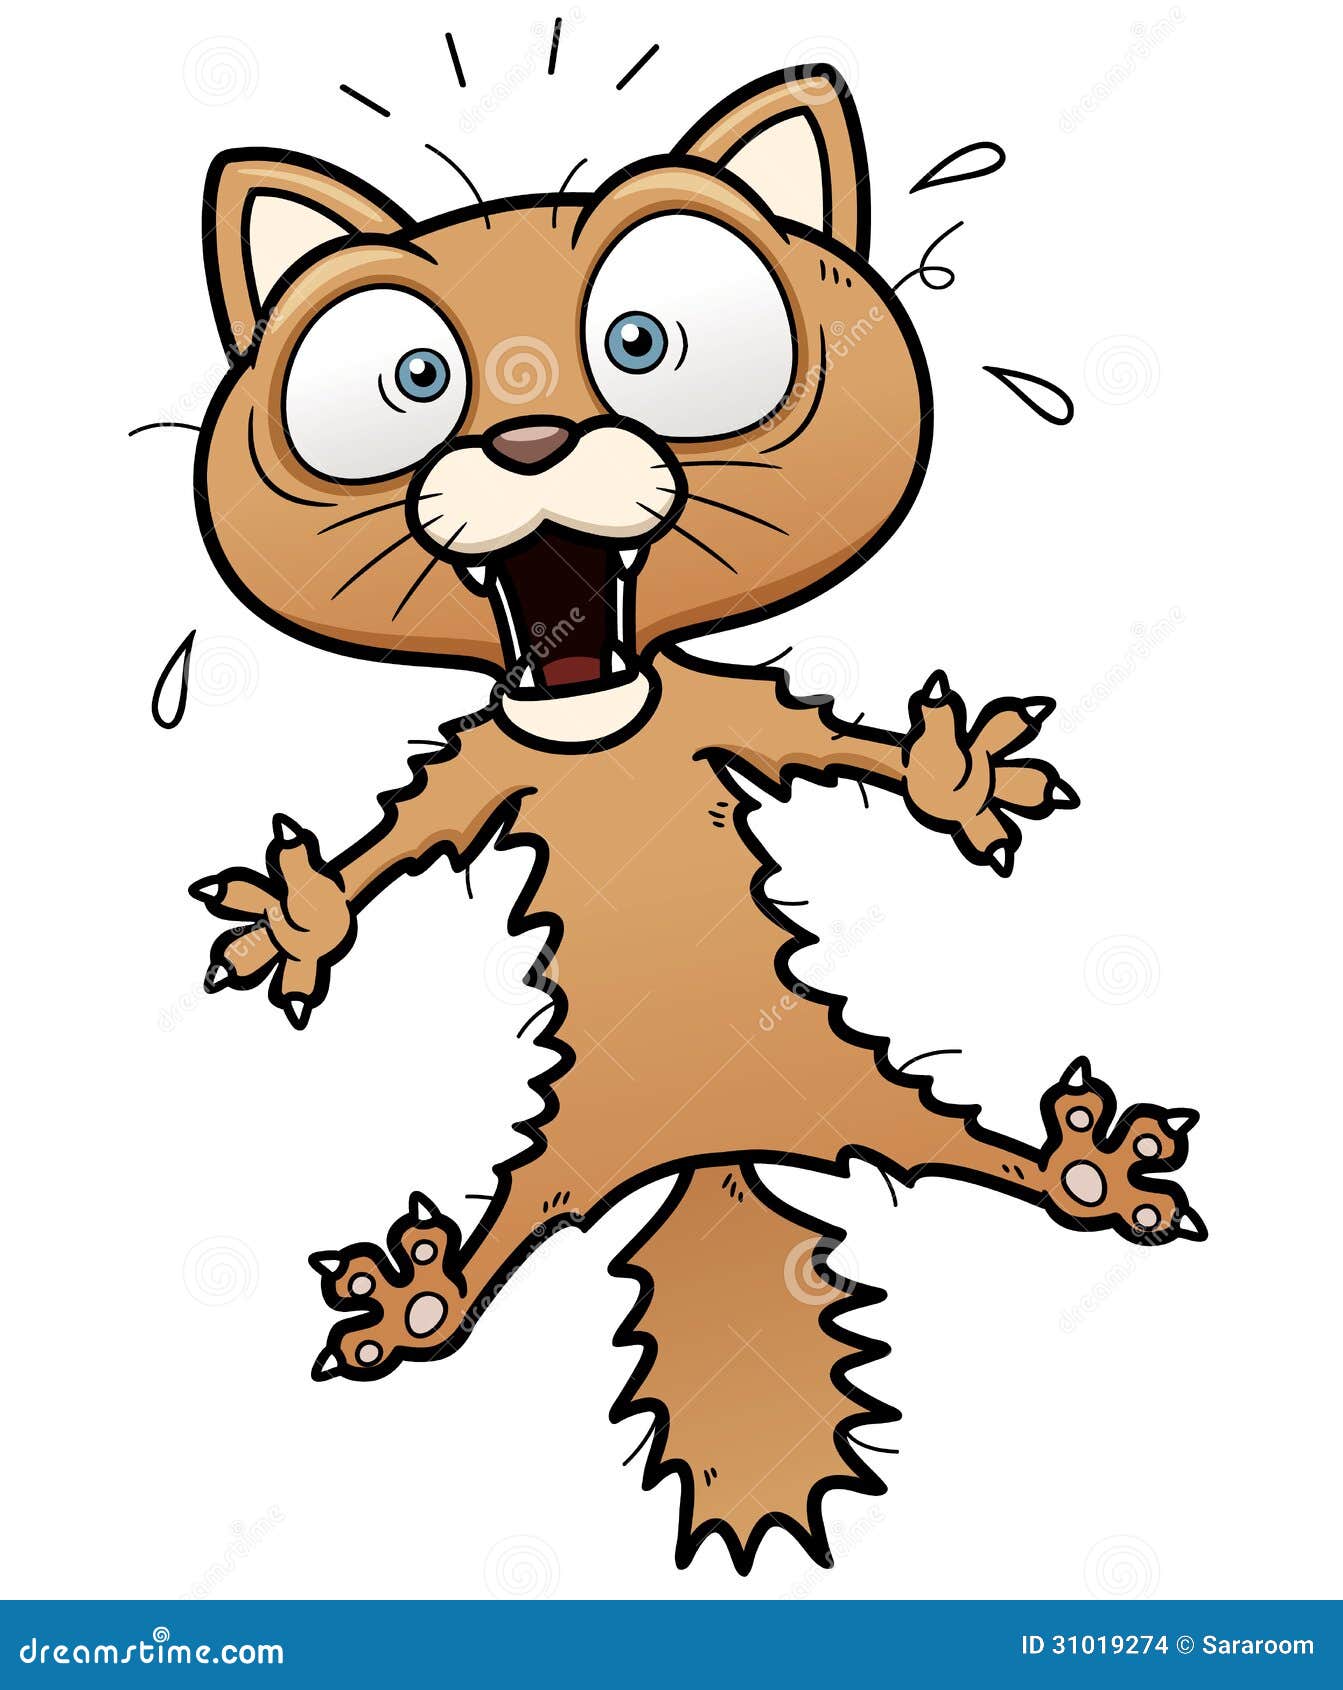 clipart of scared cat - photo #8